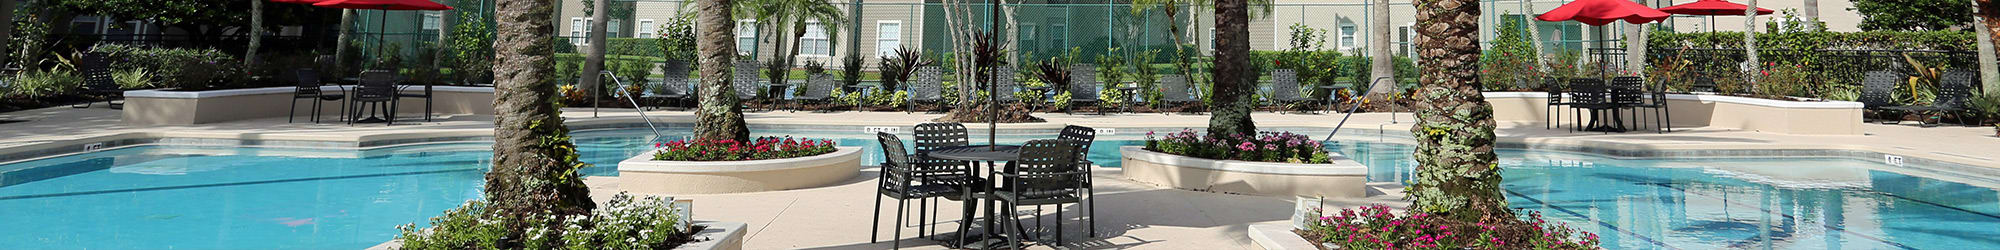 Contact The Grand Reserve at Maitland Park for information about our apartments in Orlando